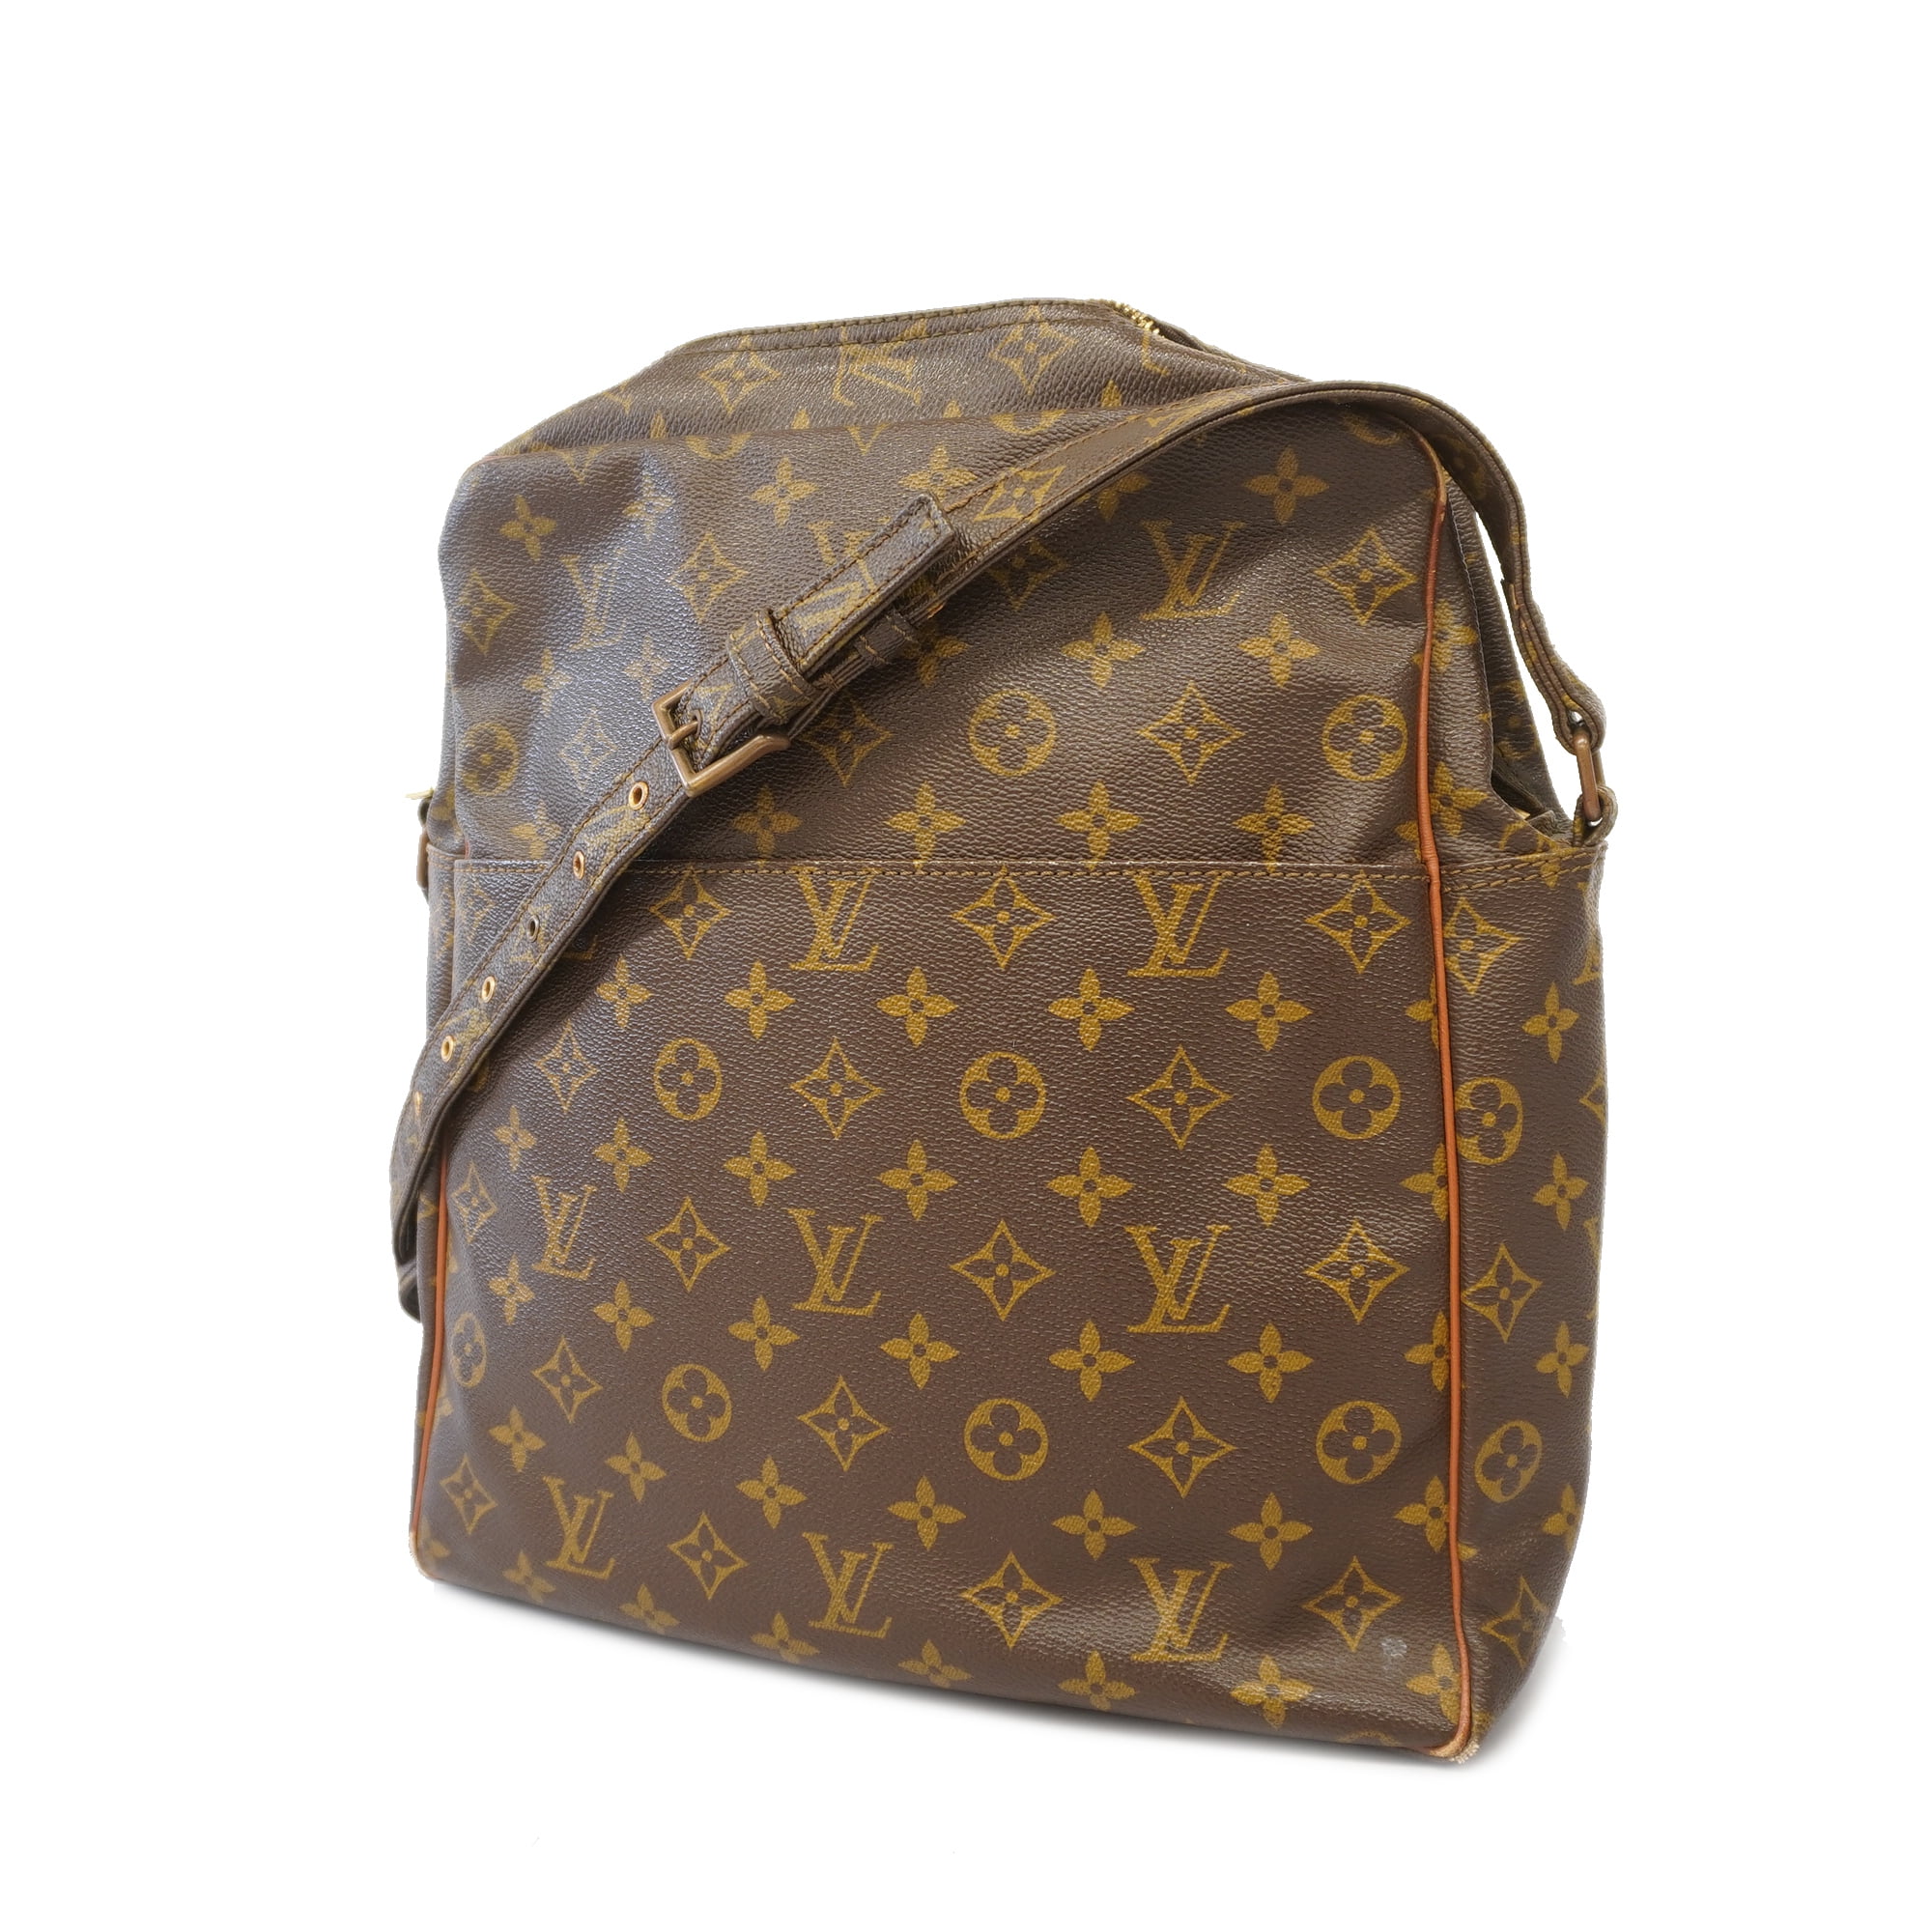 Pre-Owned & Vintage LOUIS VUITTON Crossbody Bags for Women